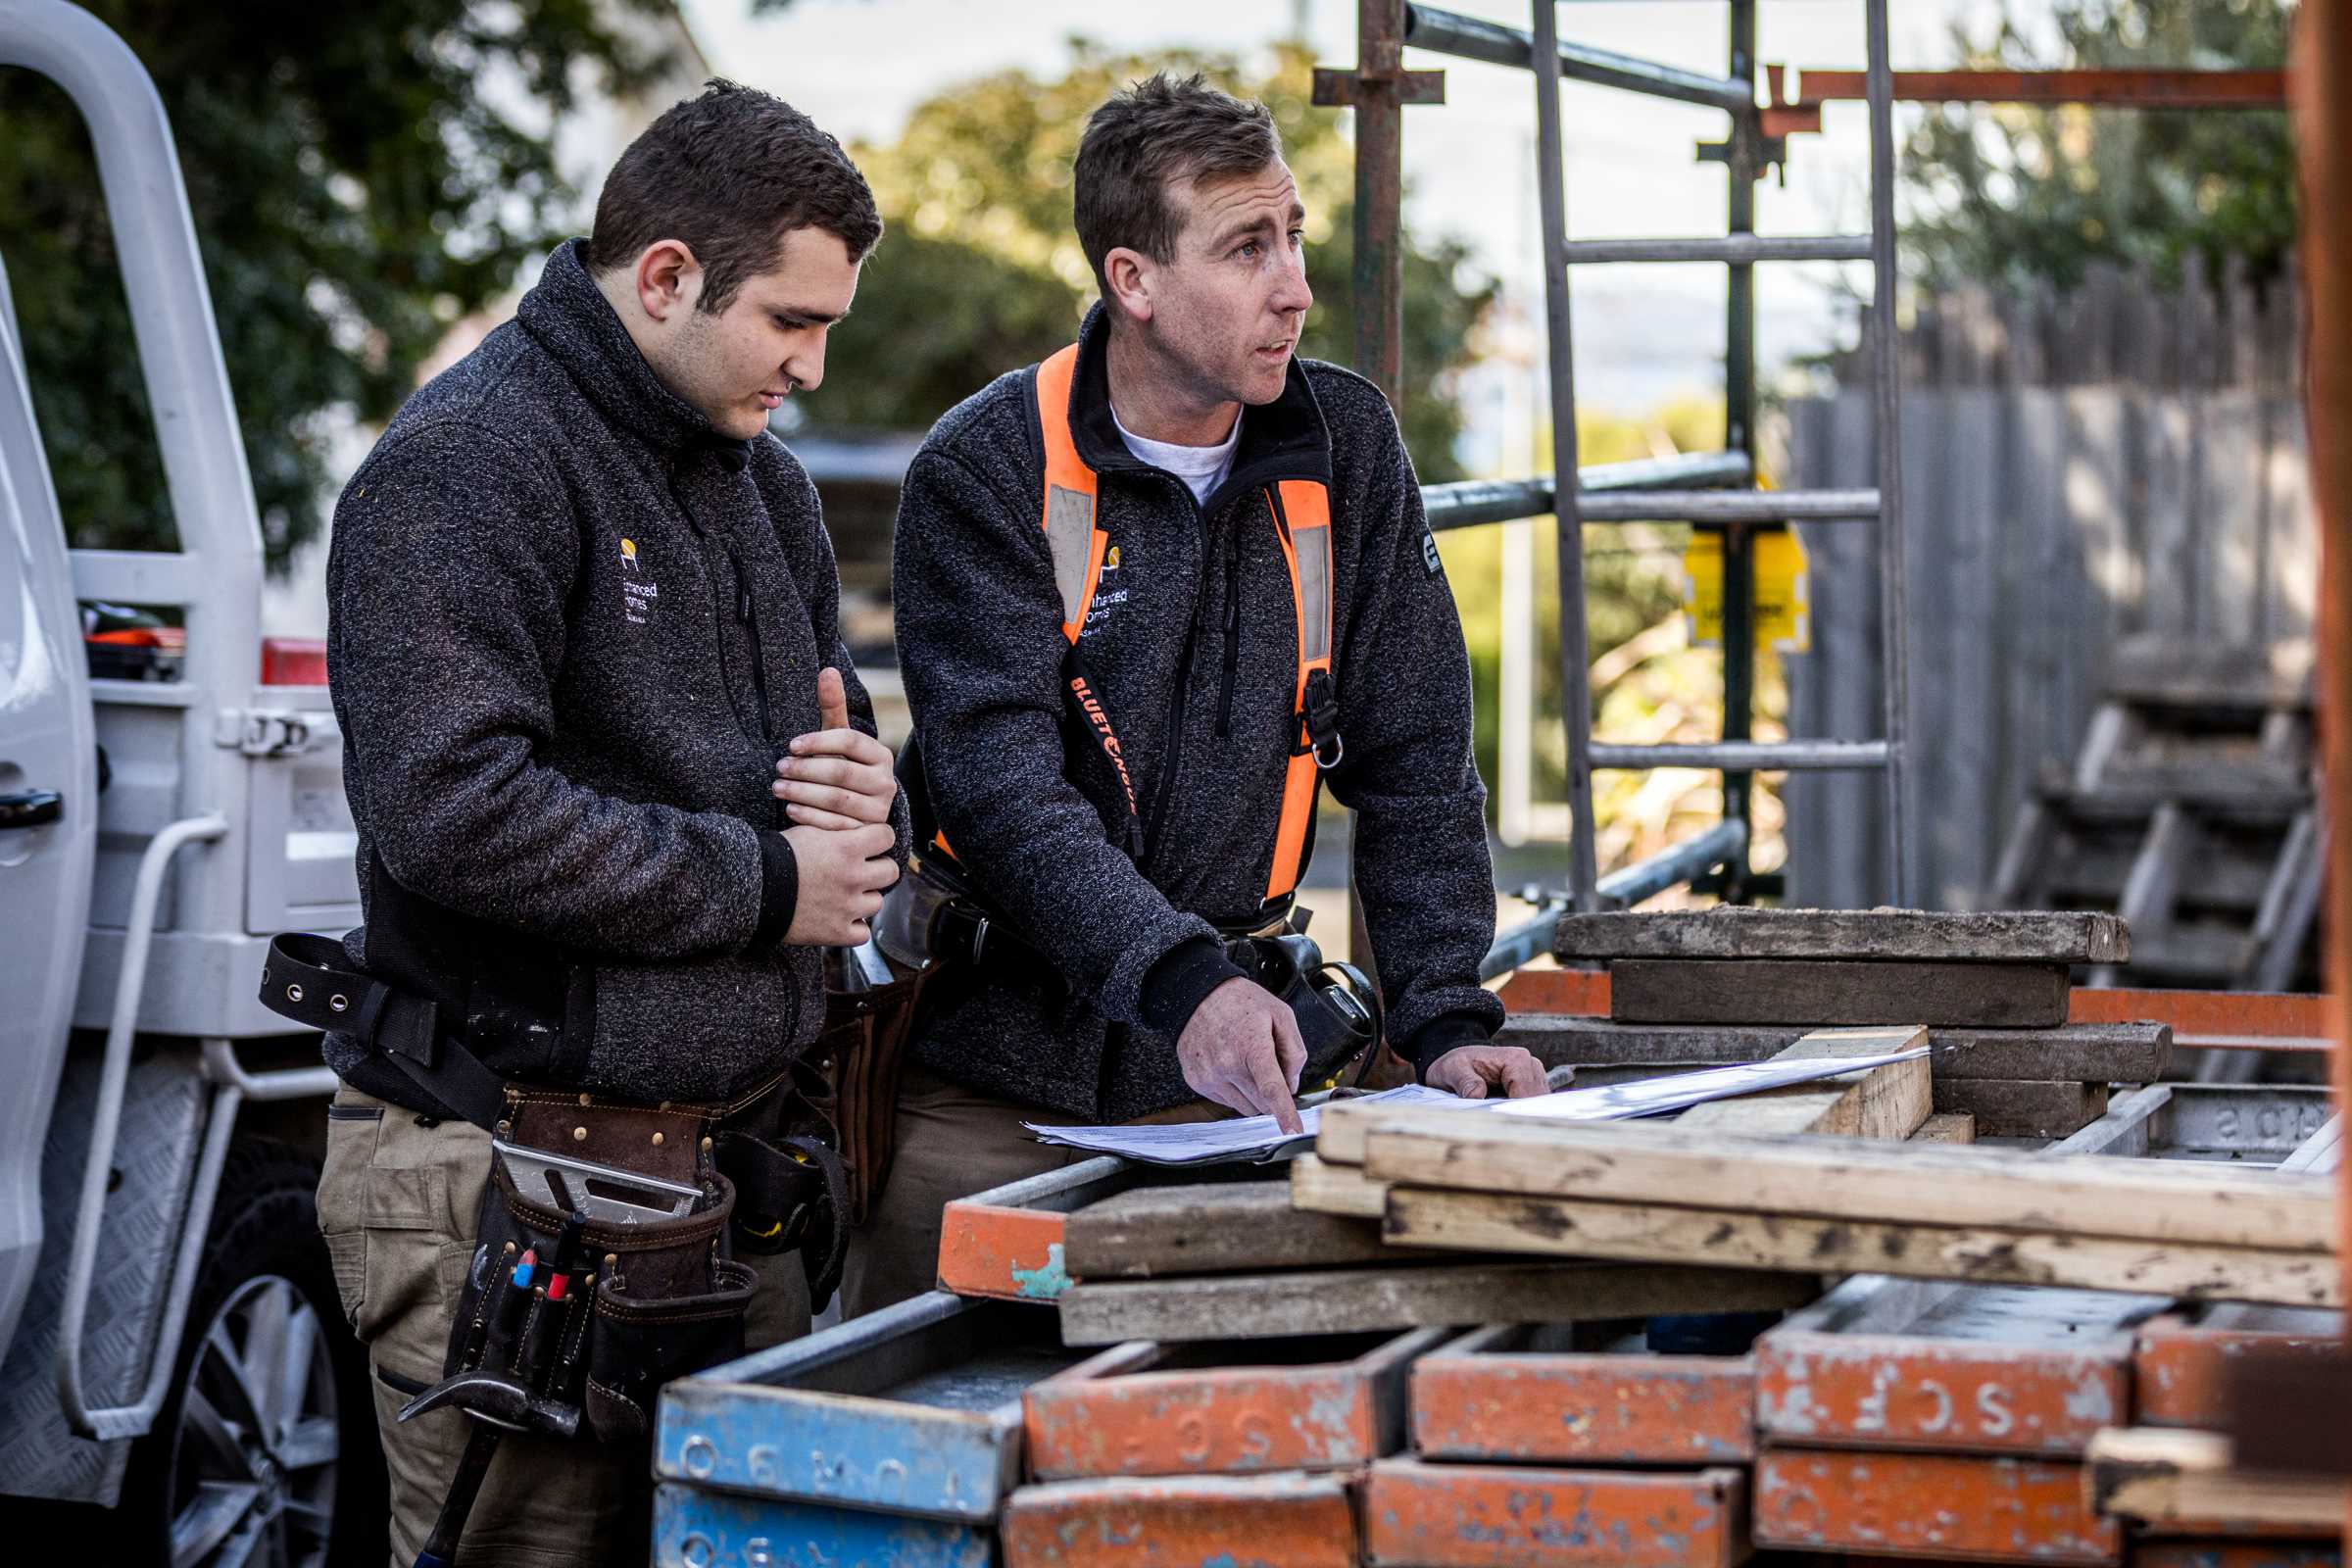 Work team accurately reading plans and construct scaffolding in a safe manner. Photo: Natalie Mendham.